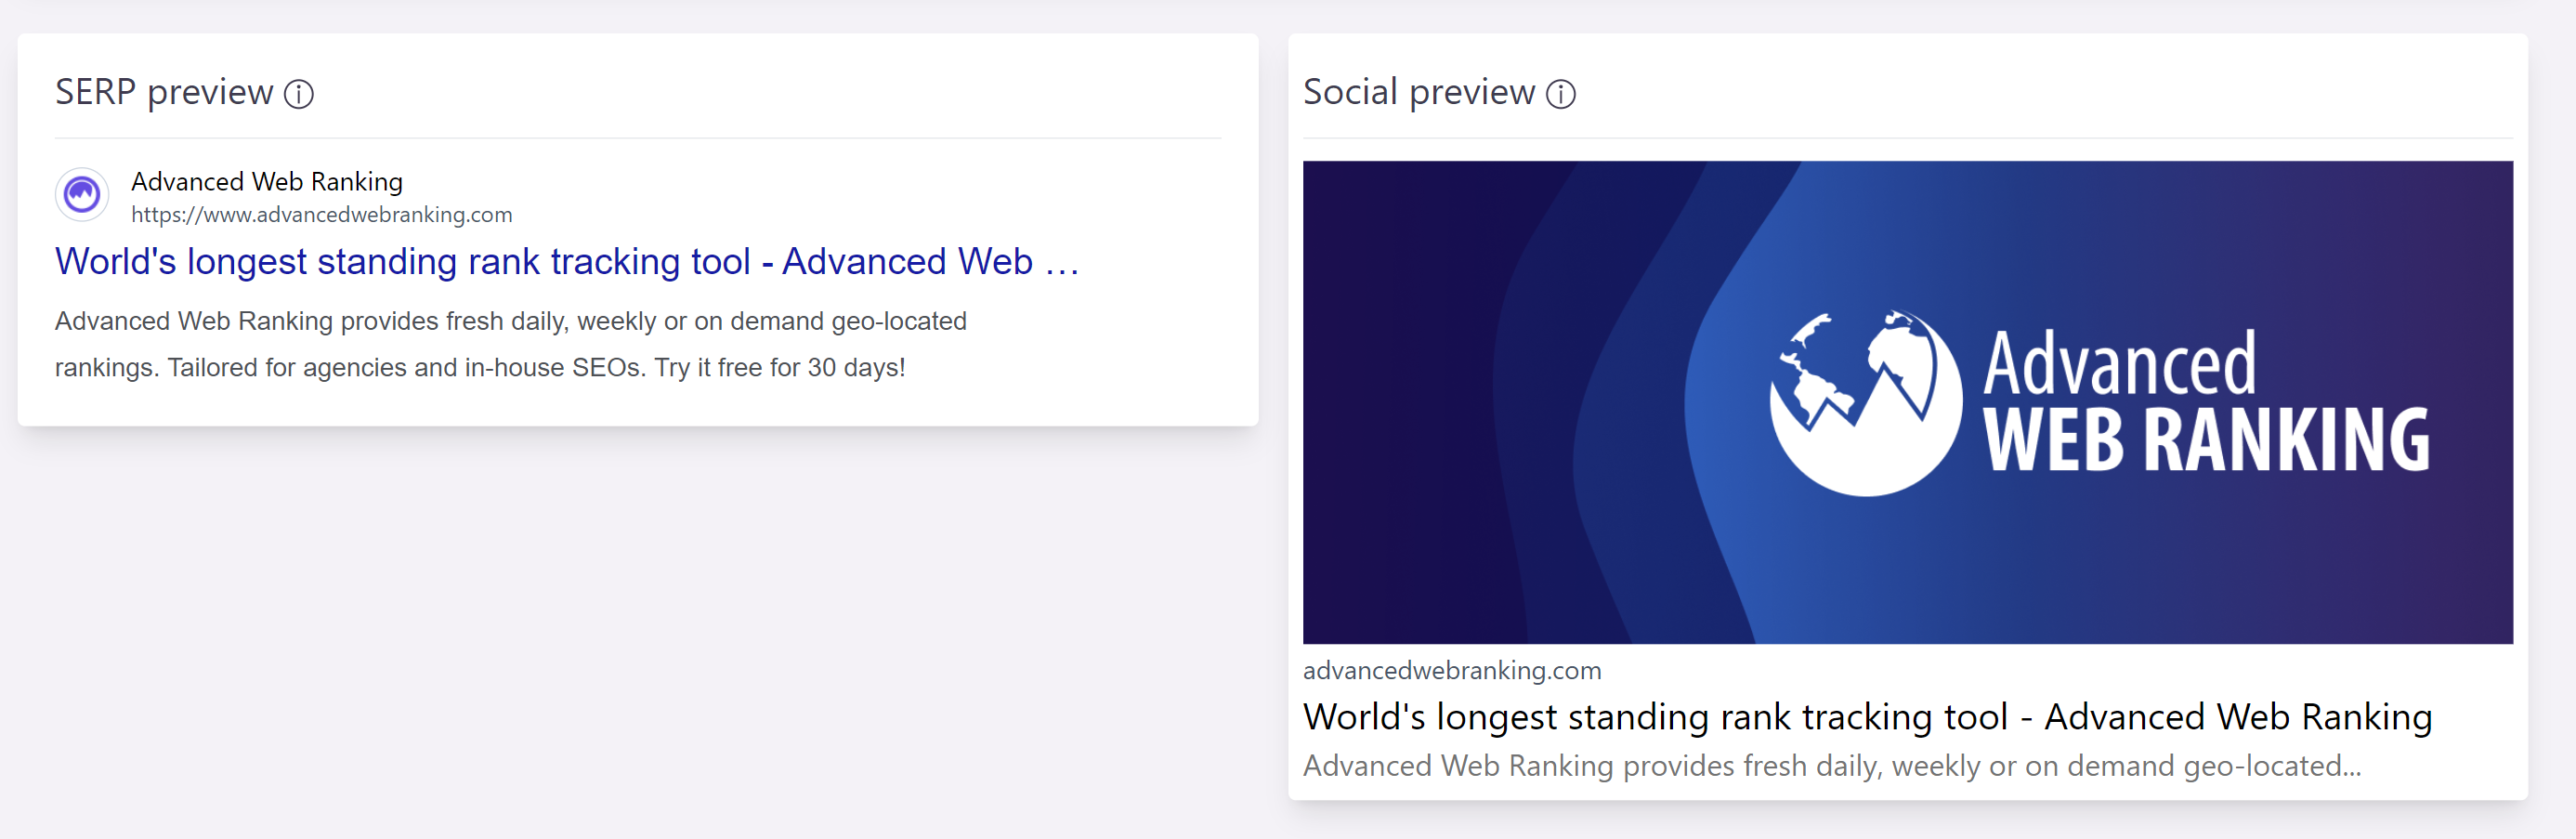 SERP and Social preview in Wattspeed